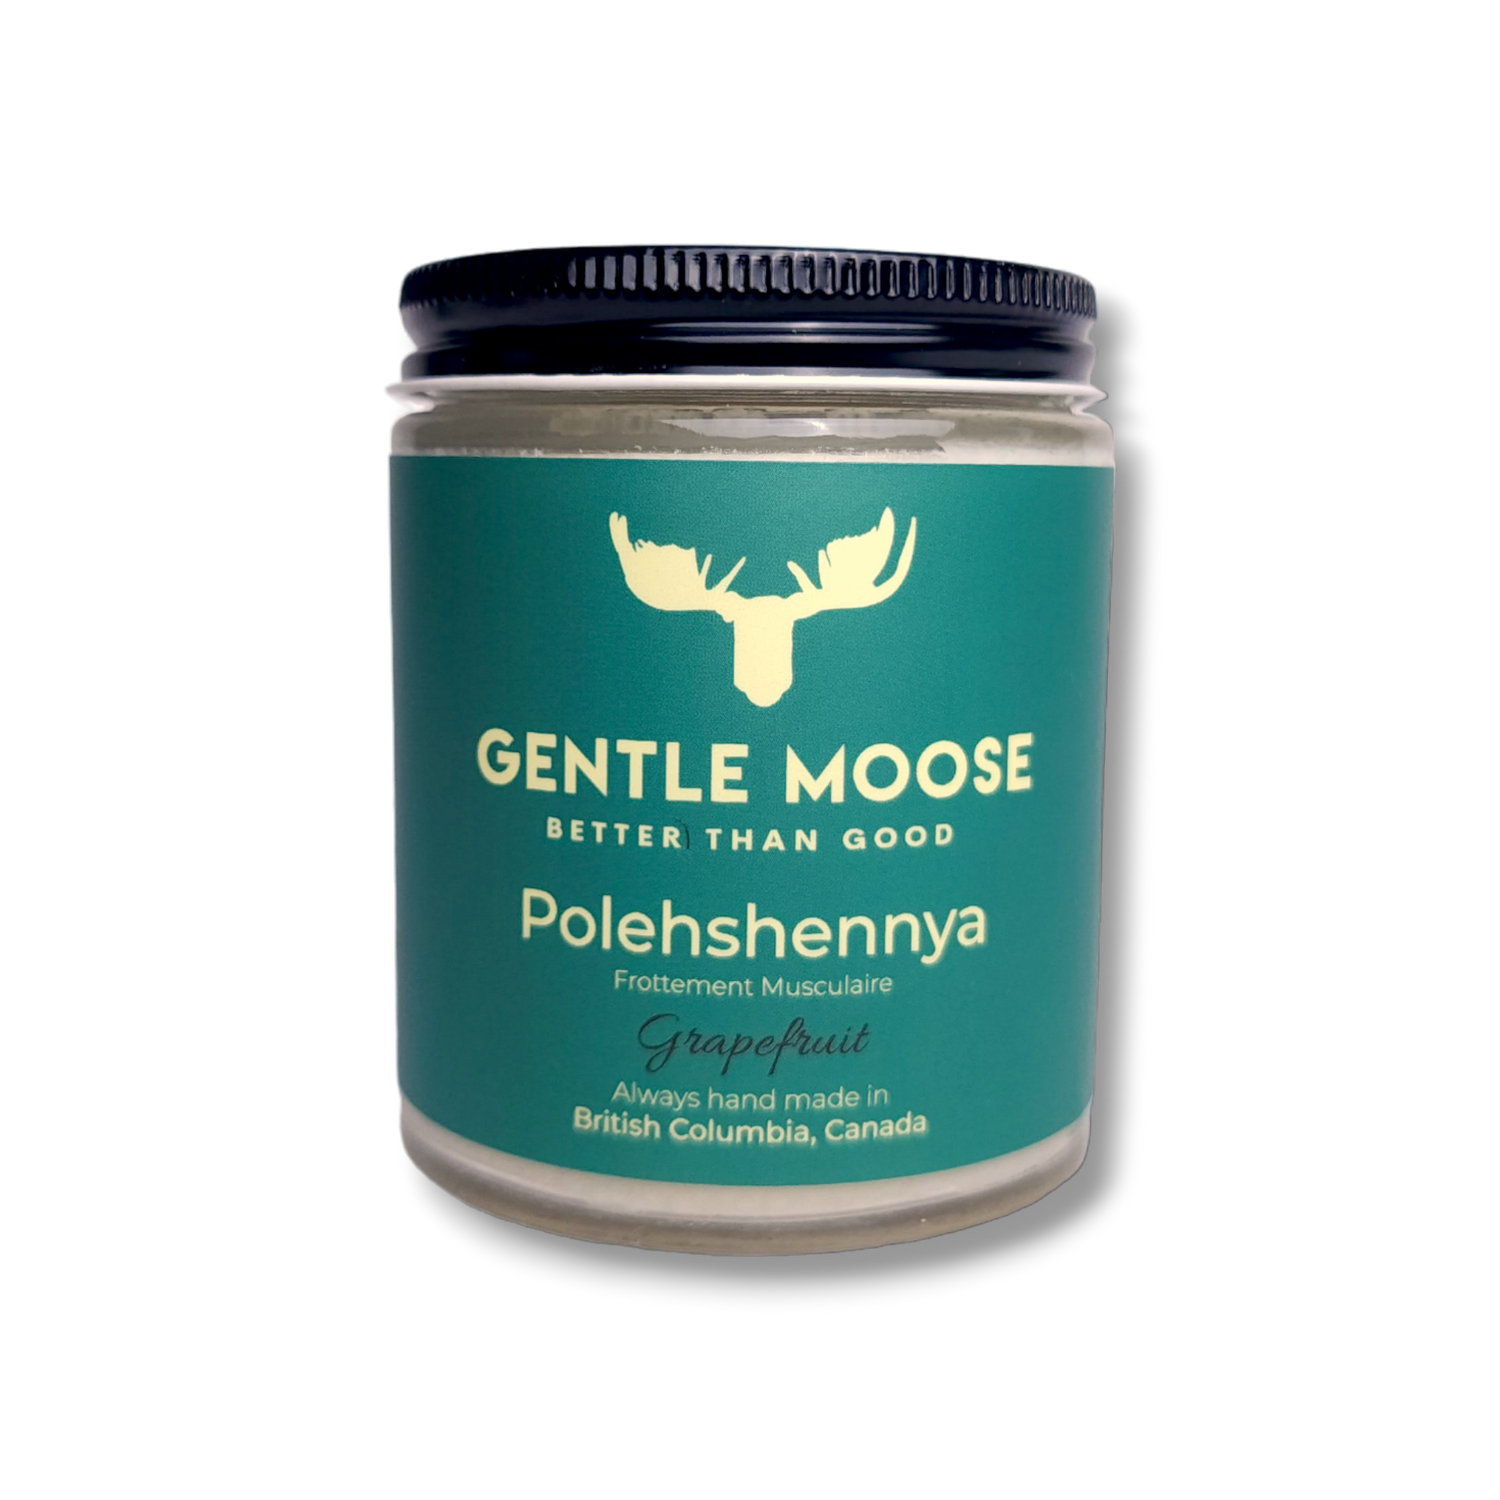 Gentle Moose Natural Skincare Muscle Rub Sore Back Relief made in Canada